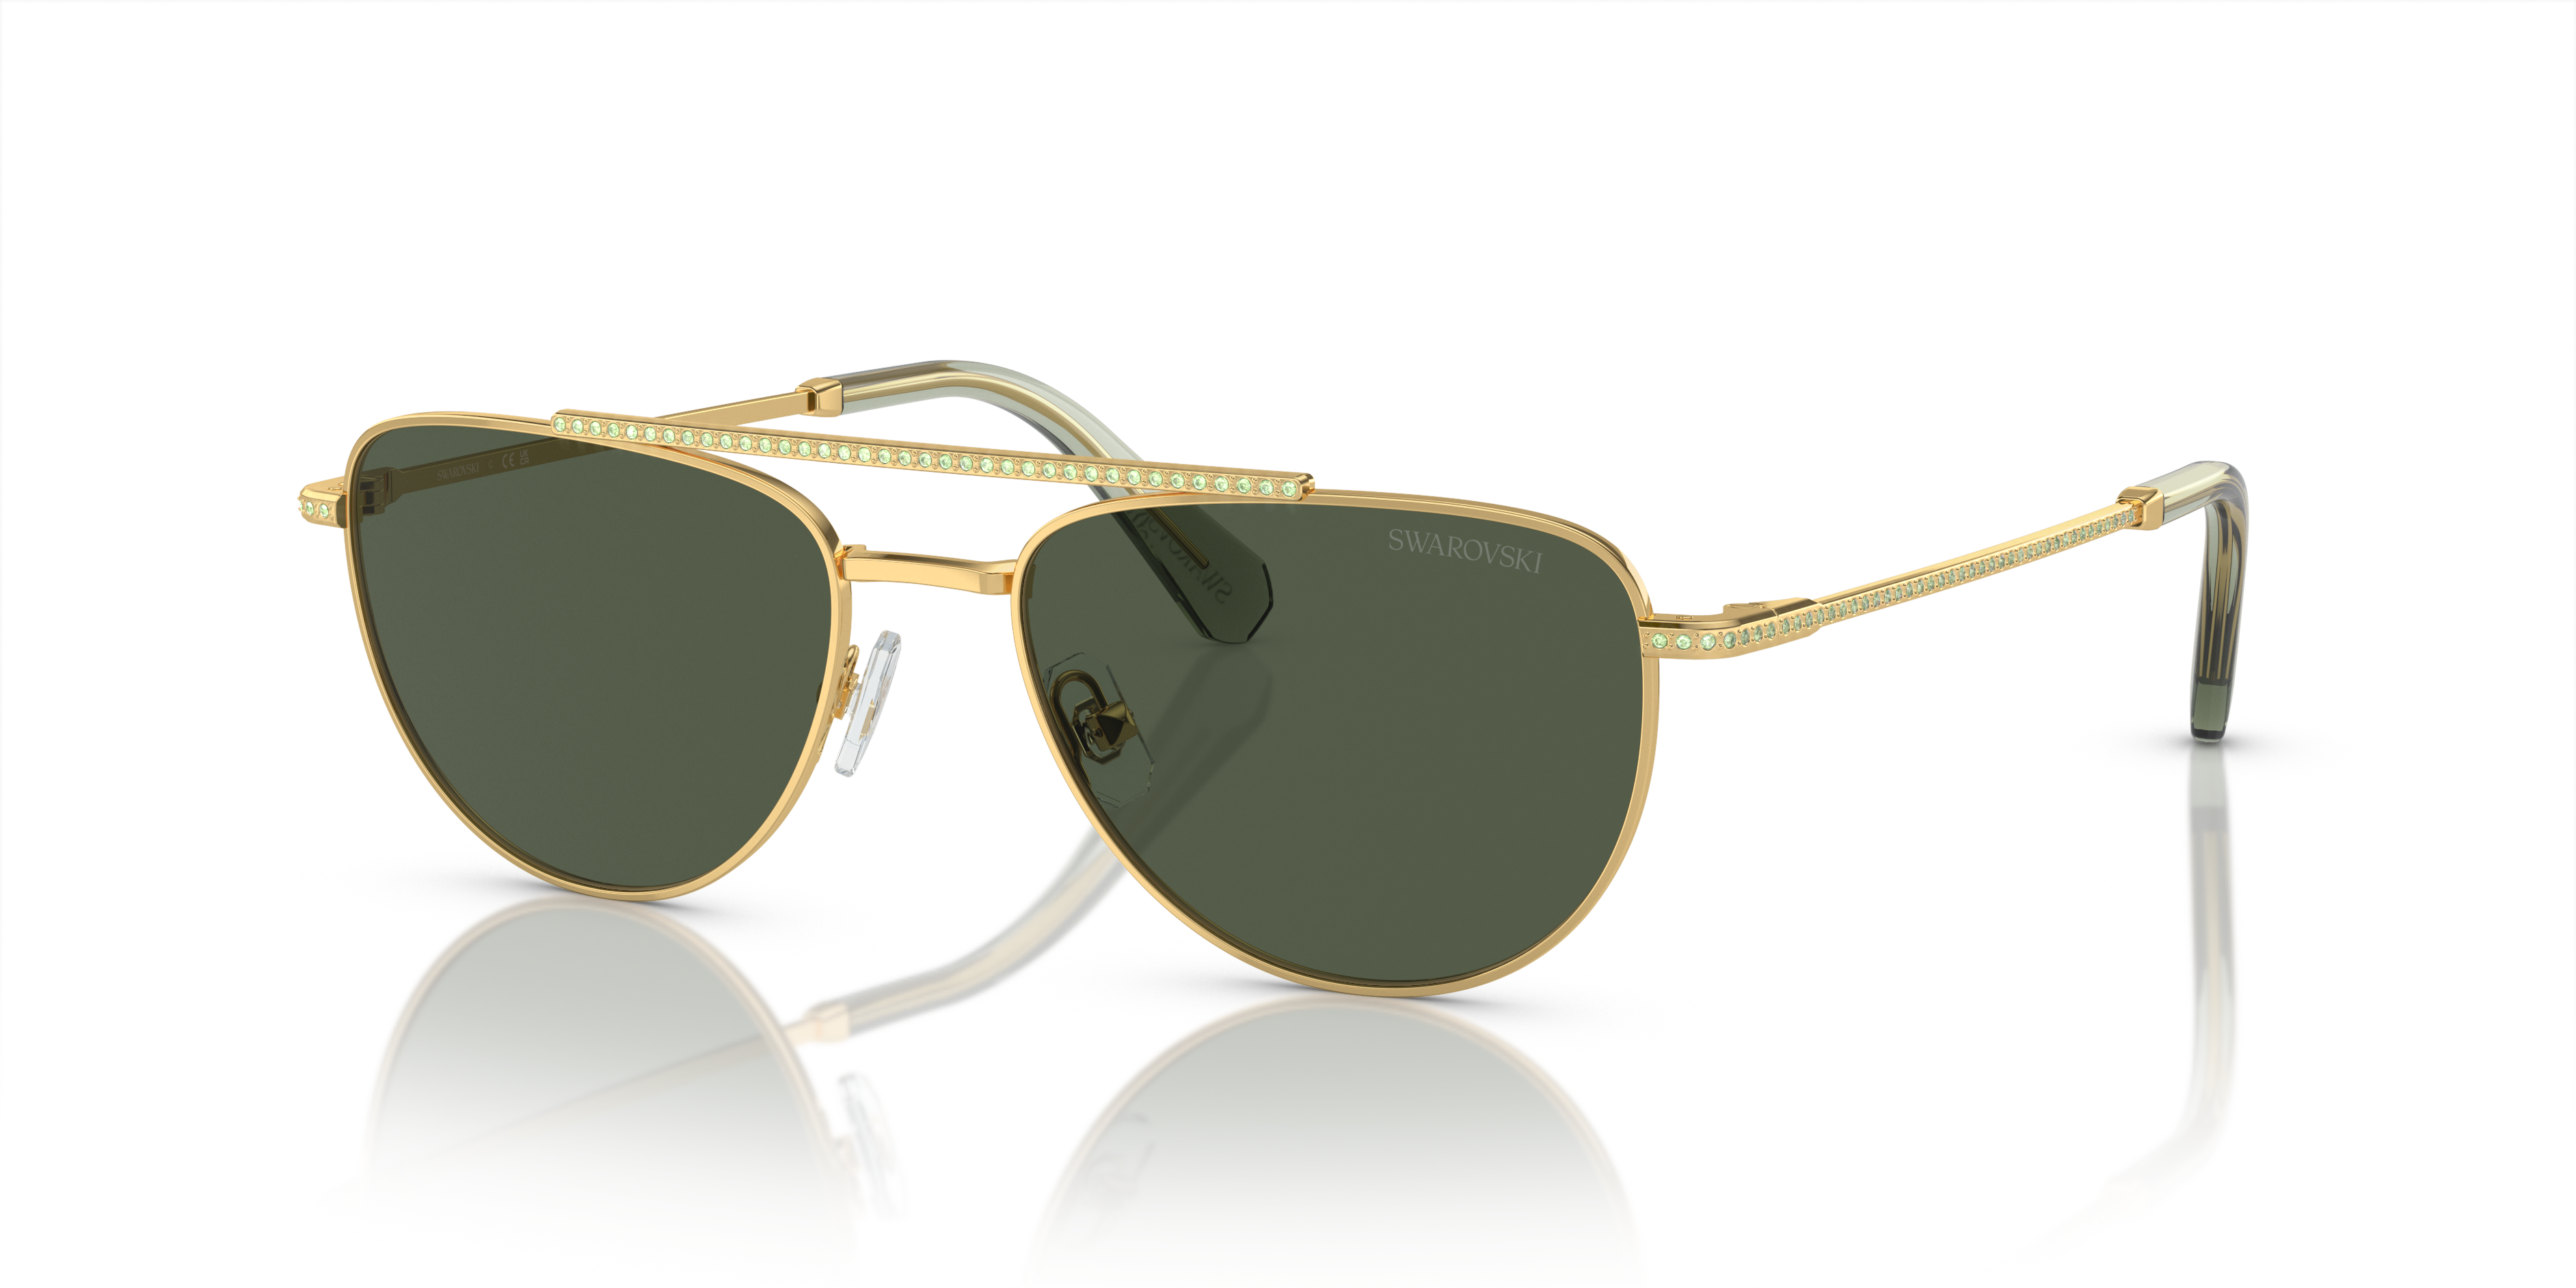 Sunglass Hut Launches Loyalty Program; Tractor Supply Amps up Member  Benefits - Retail TouchPoints